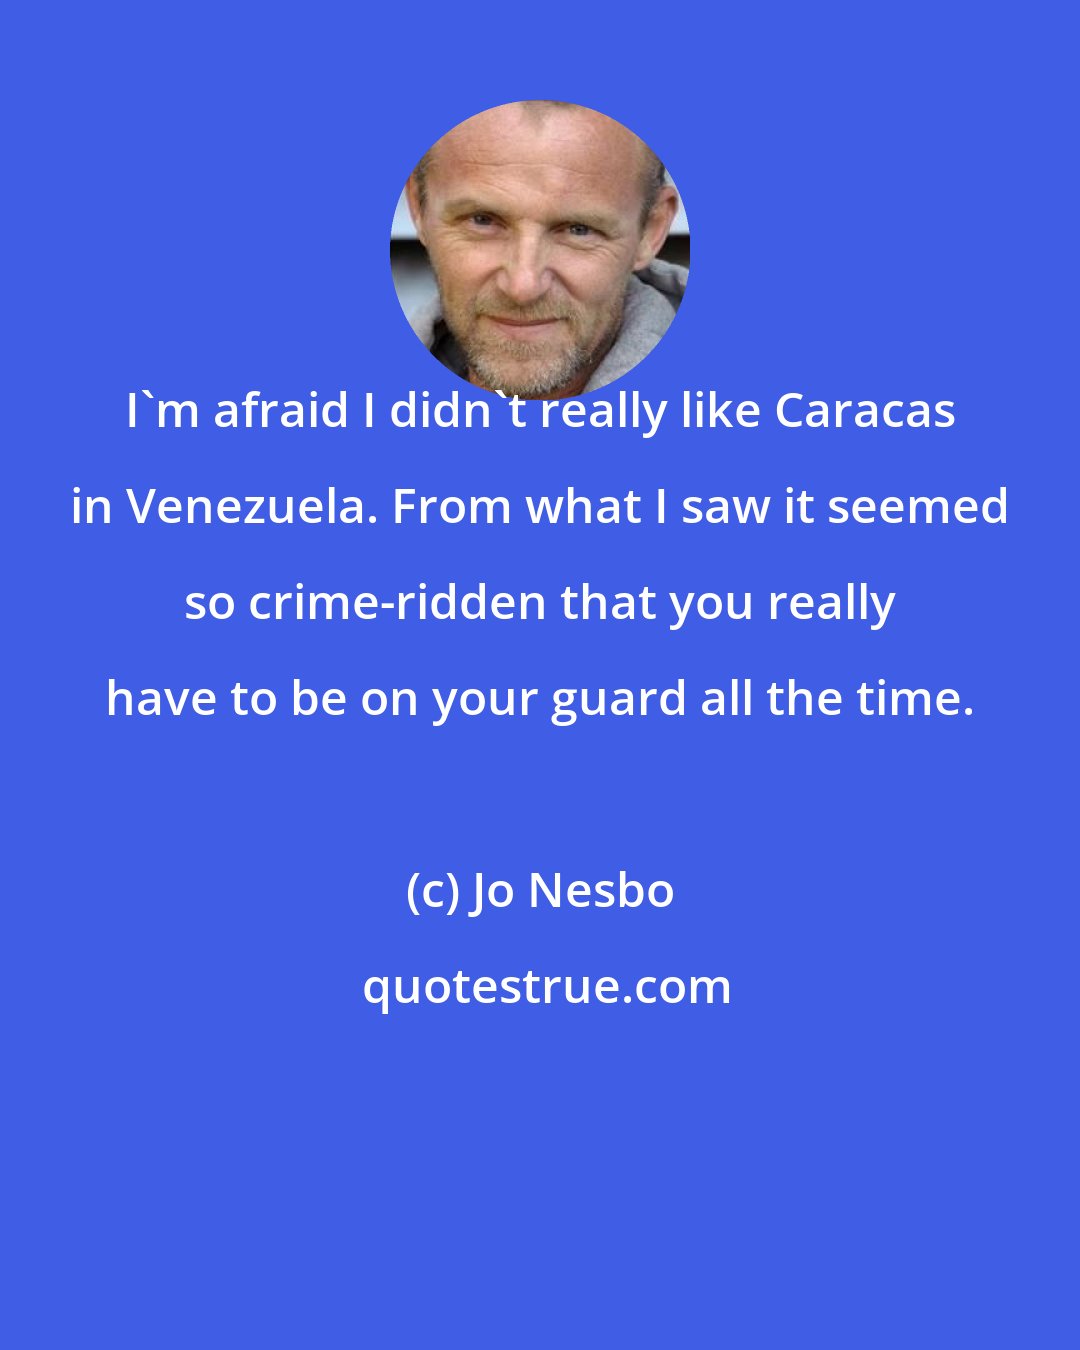 Jo Nesbo: I'm afraid I didn't really like Caracas in Venezuela. From what I saw it seemed so crime-ridden that you really have to be on your guard all the time.